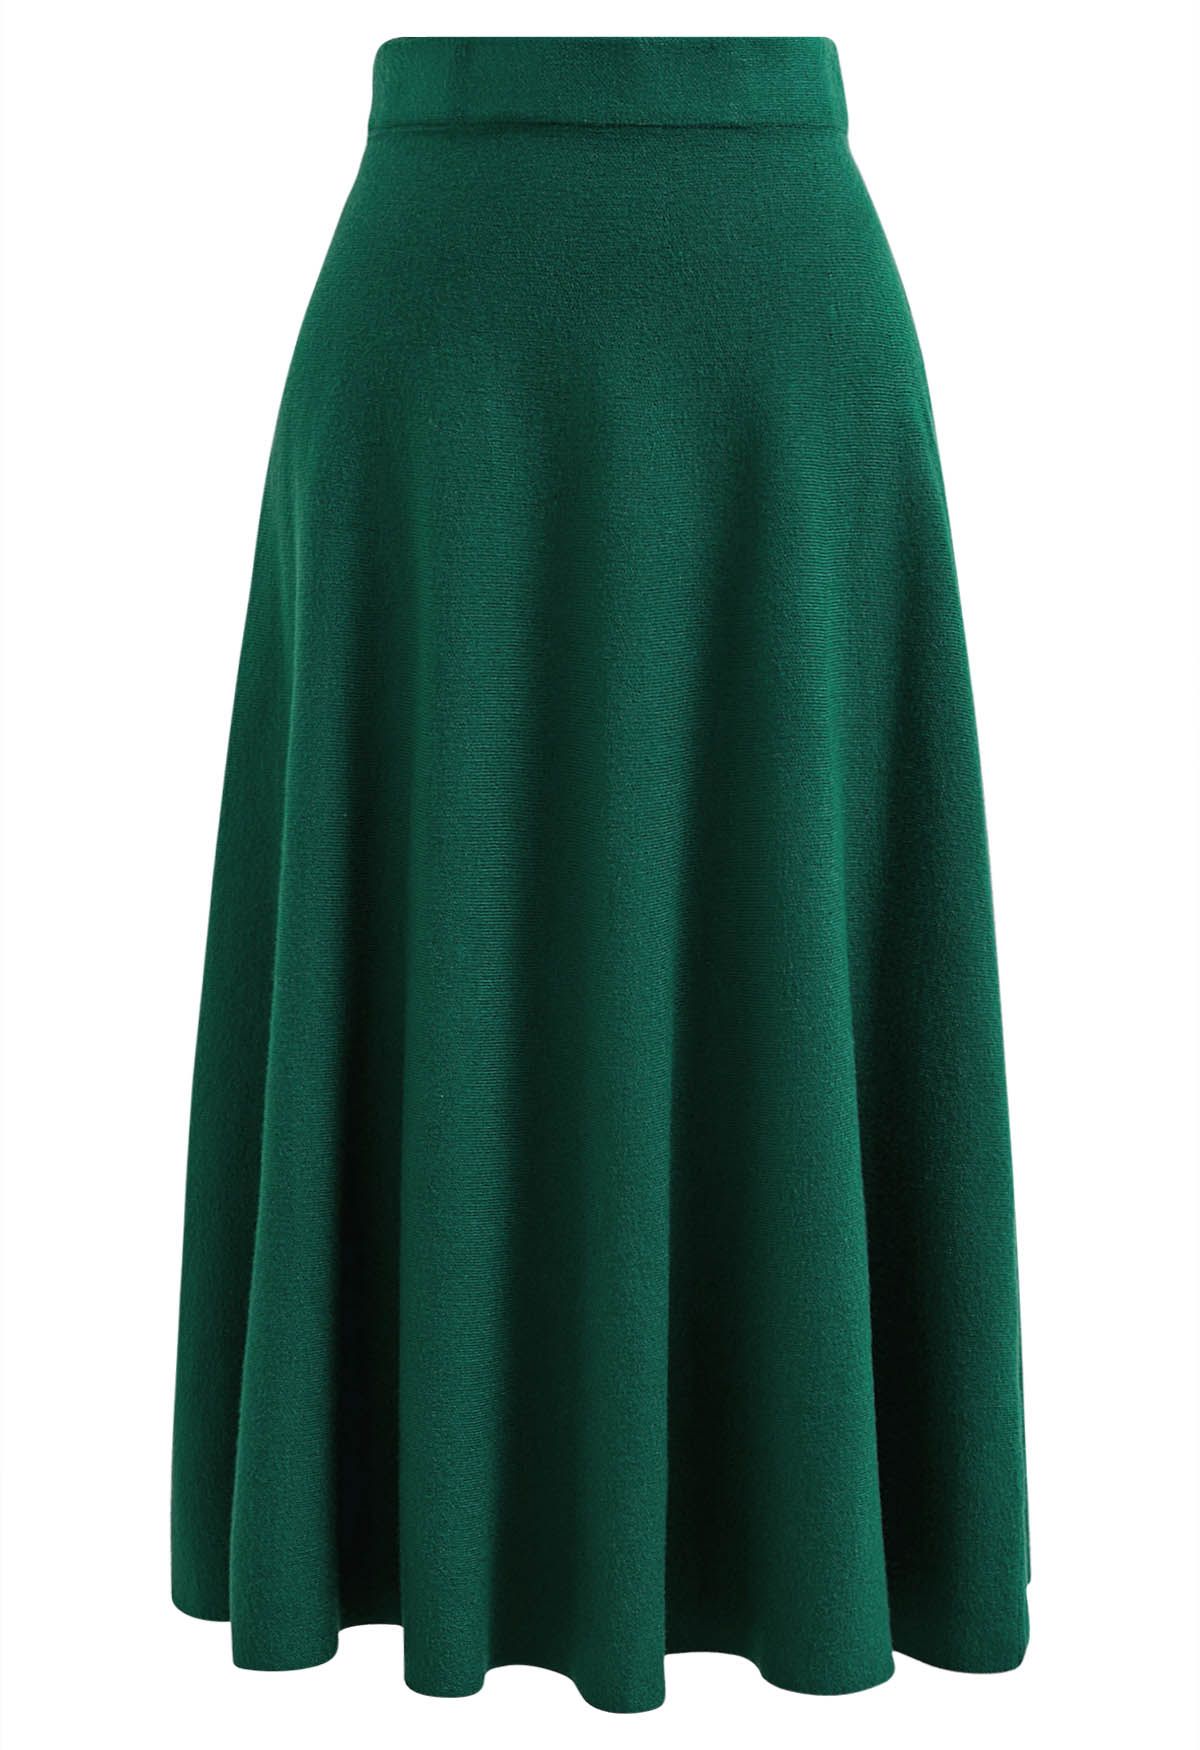 Solid Color A-Line Knit Midi Skirt in Dark Green - Retro, Indie and ...